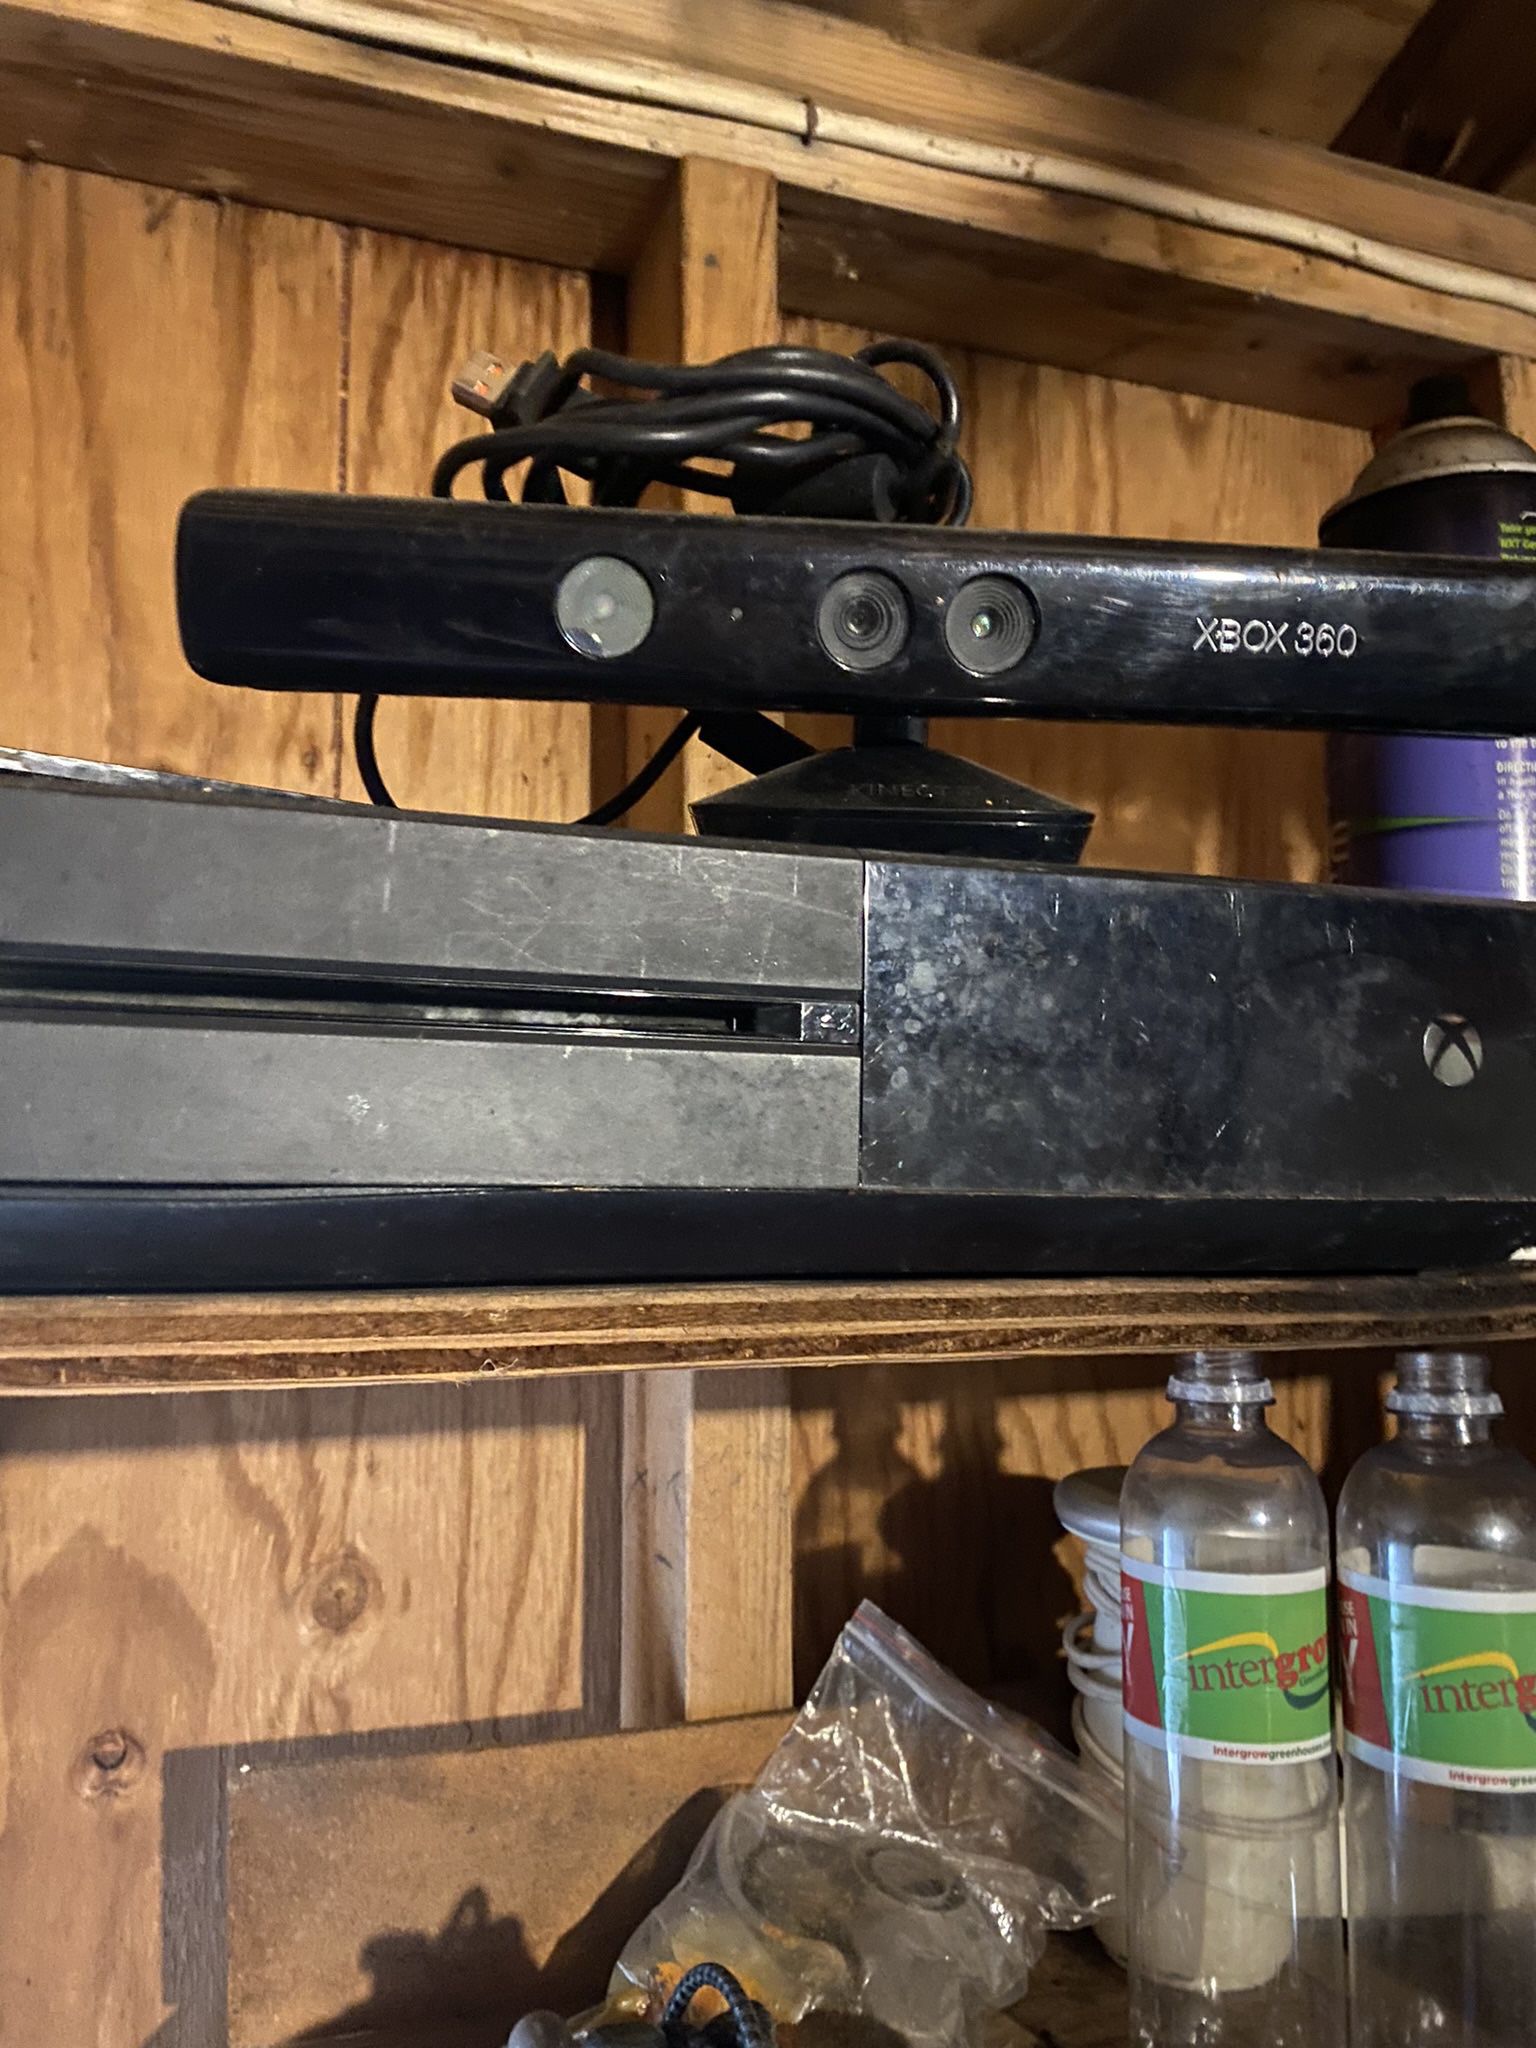 Xbox One With Kinect 